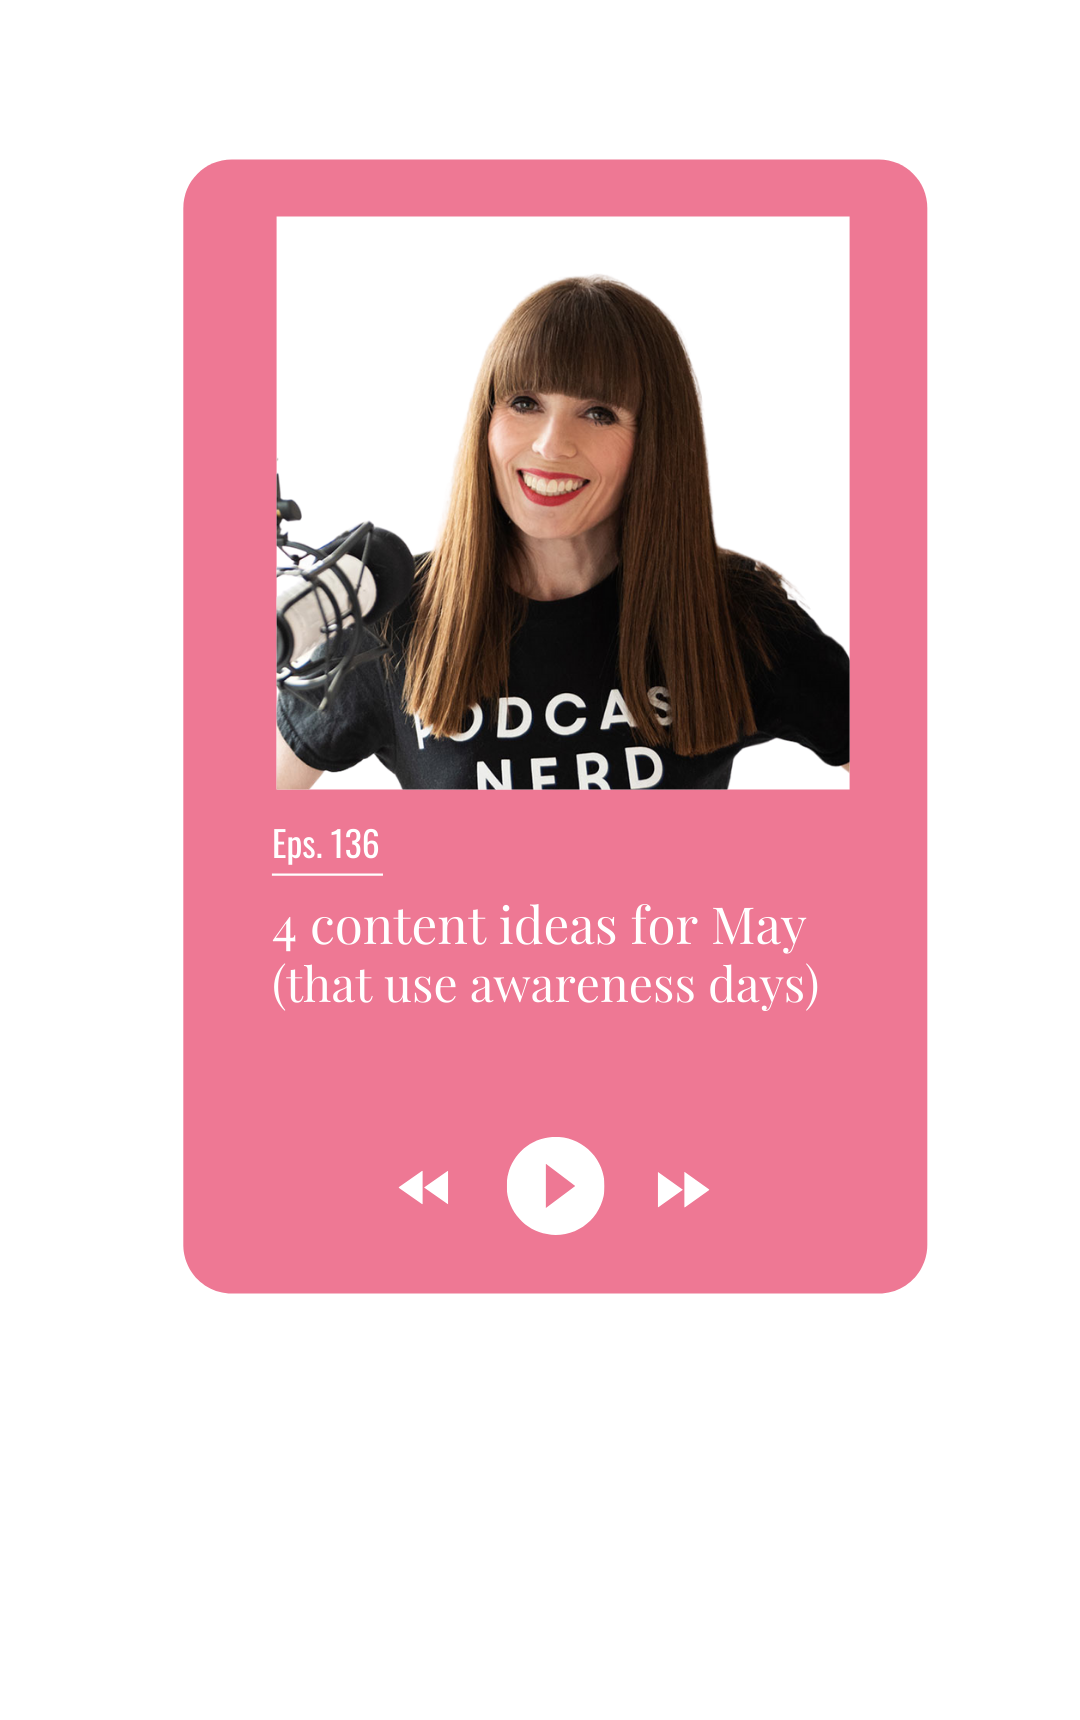 4 content ideas for May (that use awareness days)